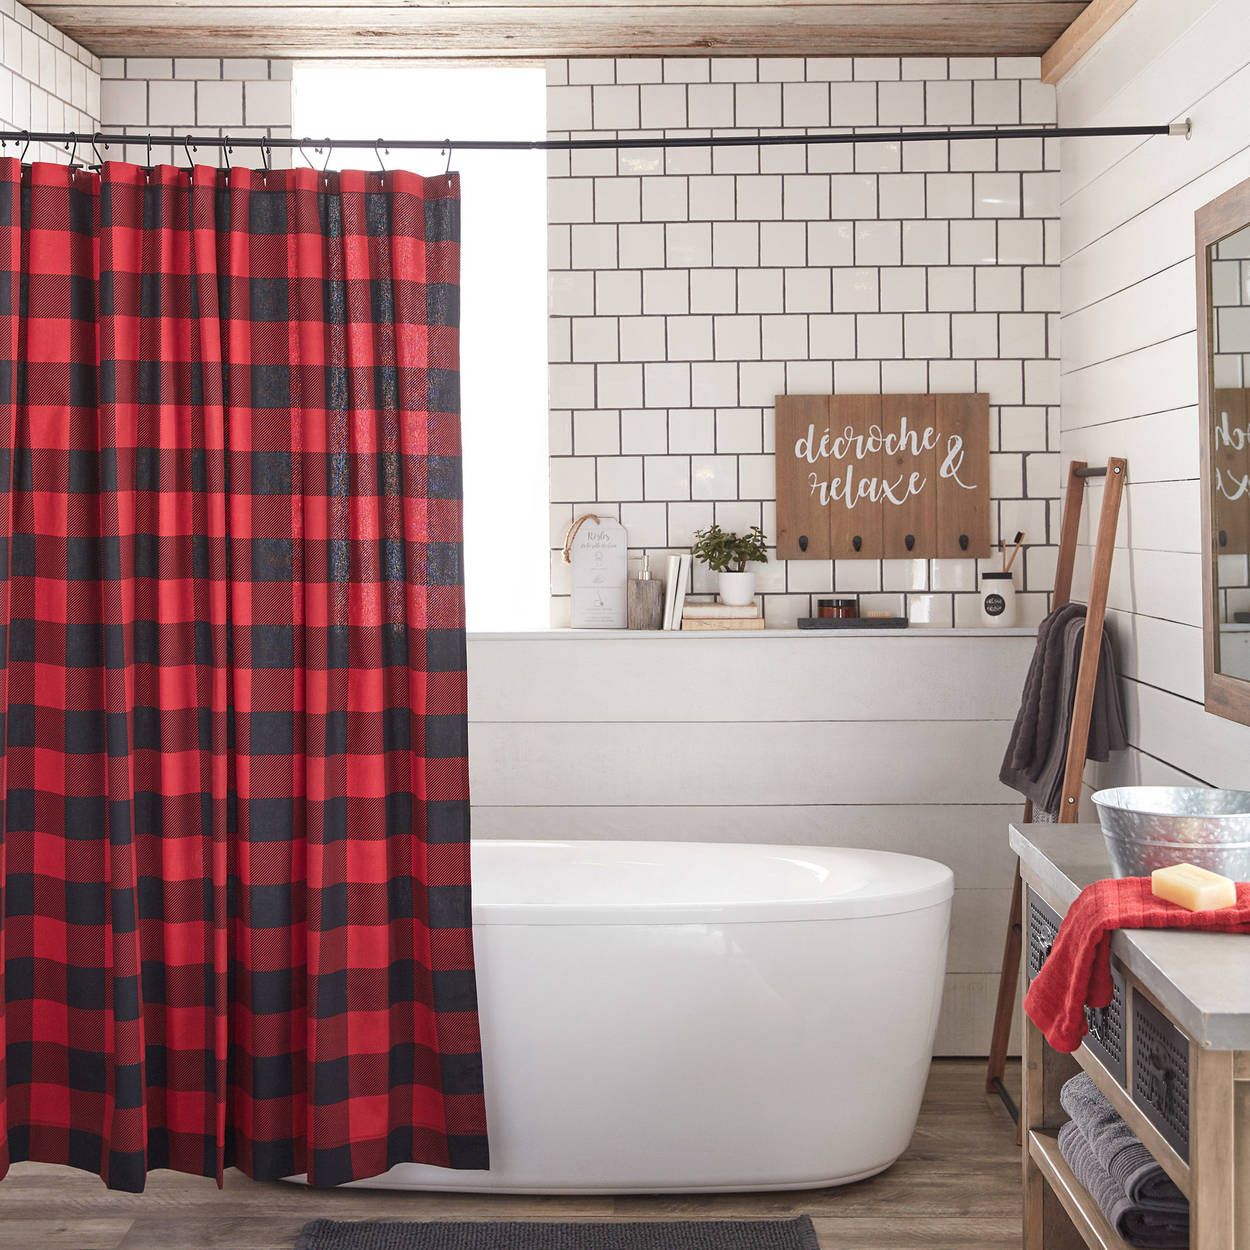 Bring a modern rustic touch into your bathroom with this stylish